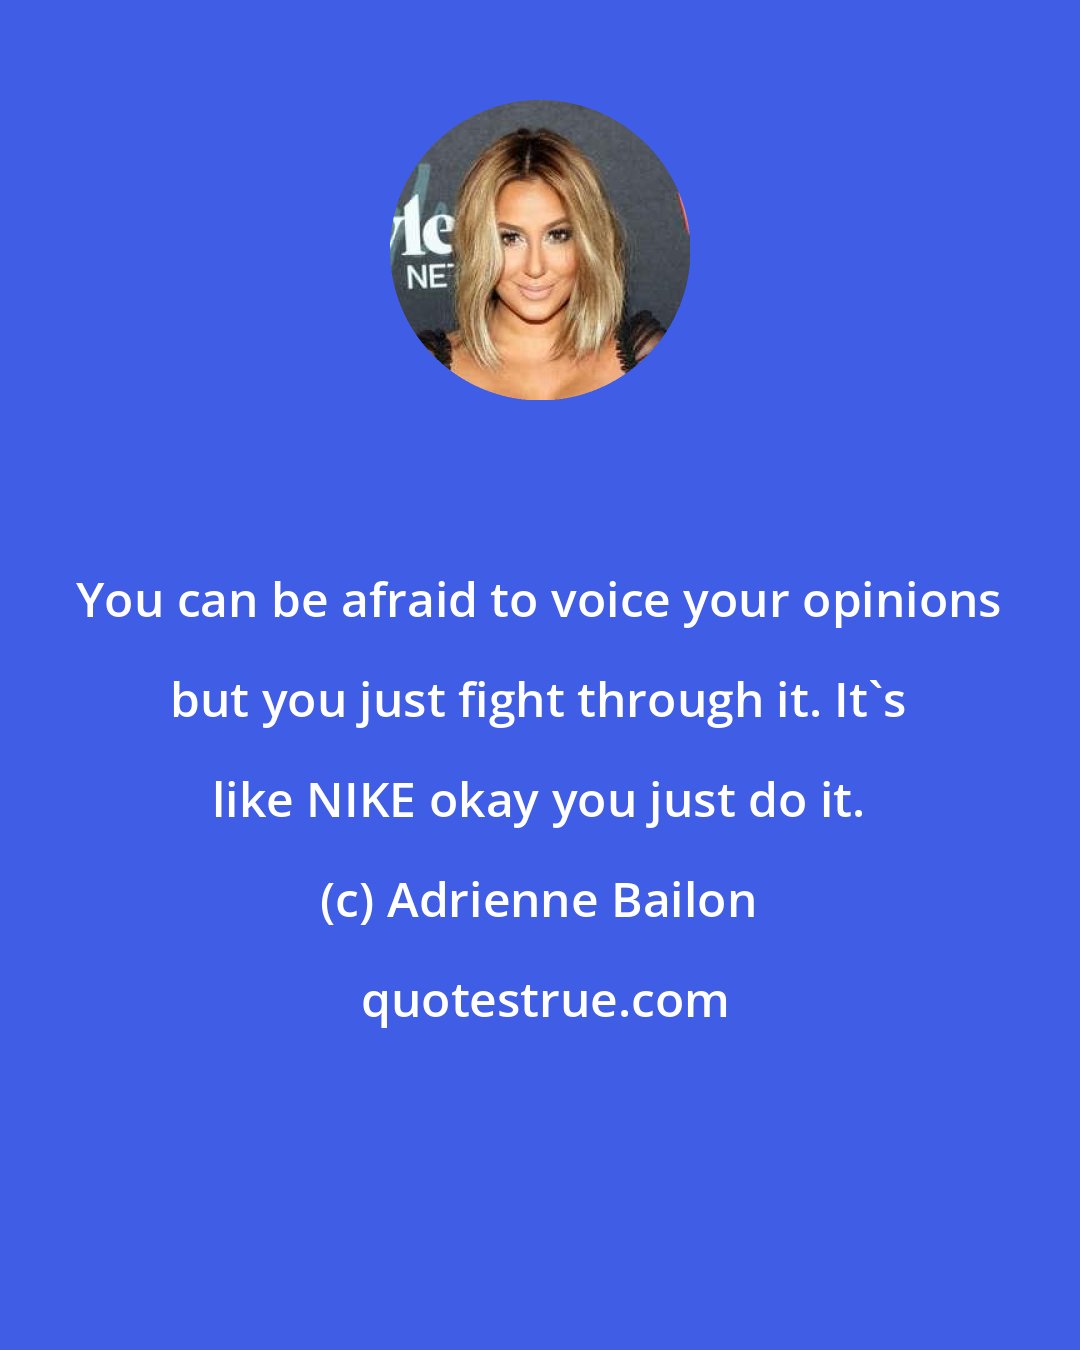 Adrienne Bailon: You can be afraid to voice your opinions but you just fight through it. It's like NIKE okay you just do it.